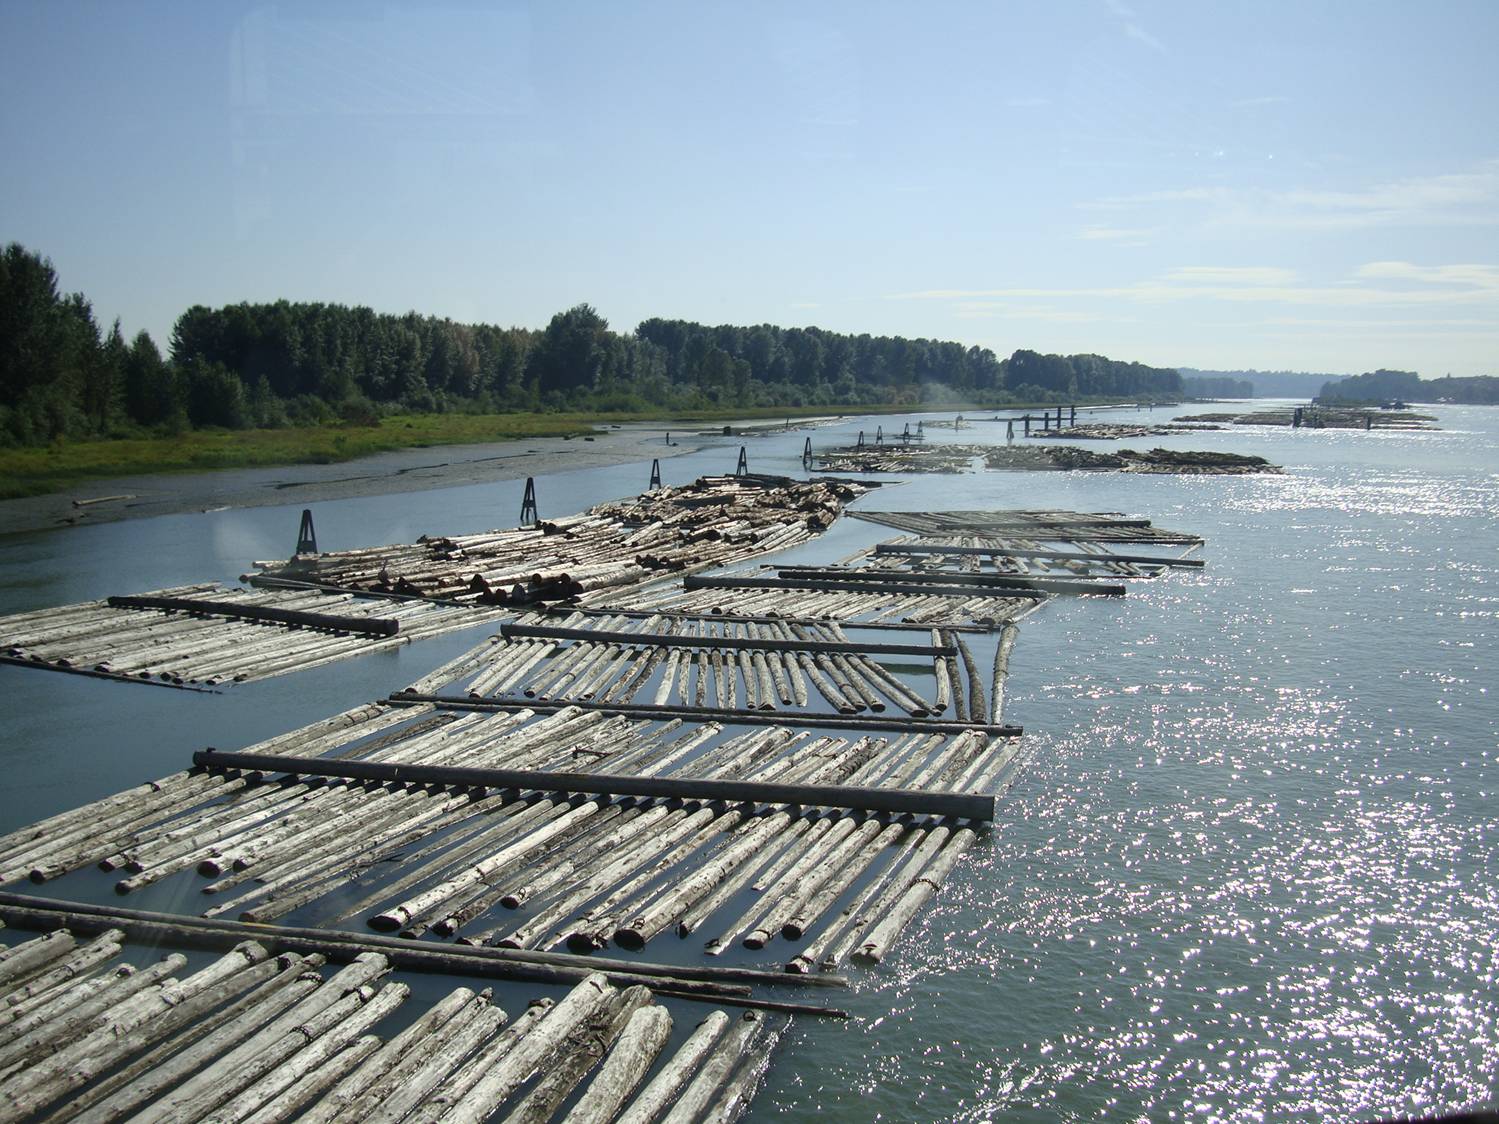 Log booms on the Fraser, as seen from the West Coast Express train.